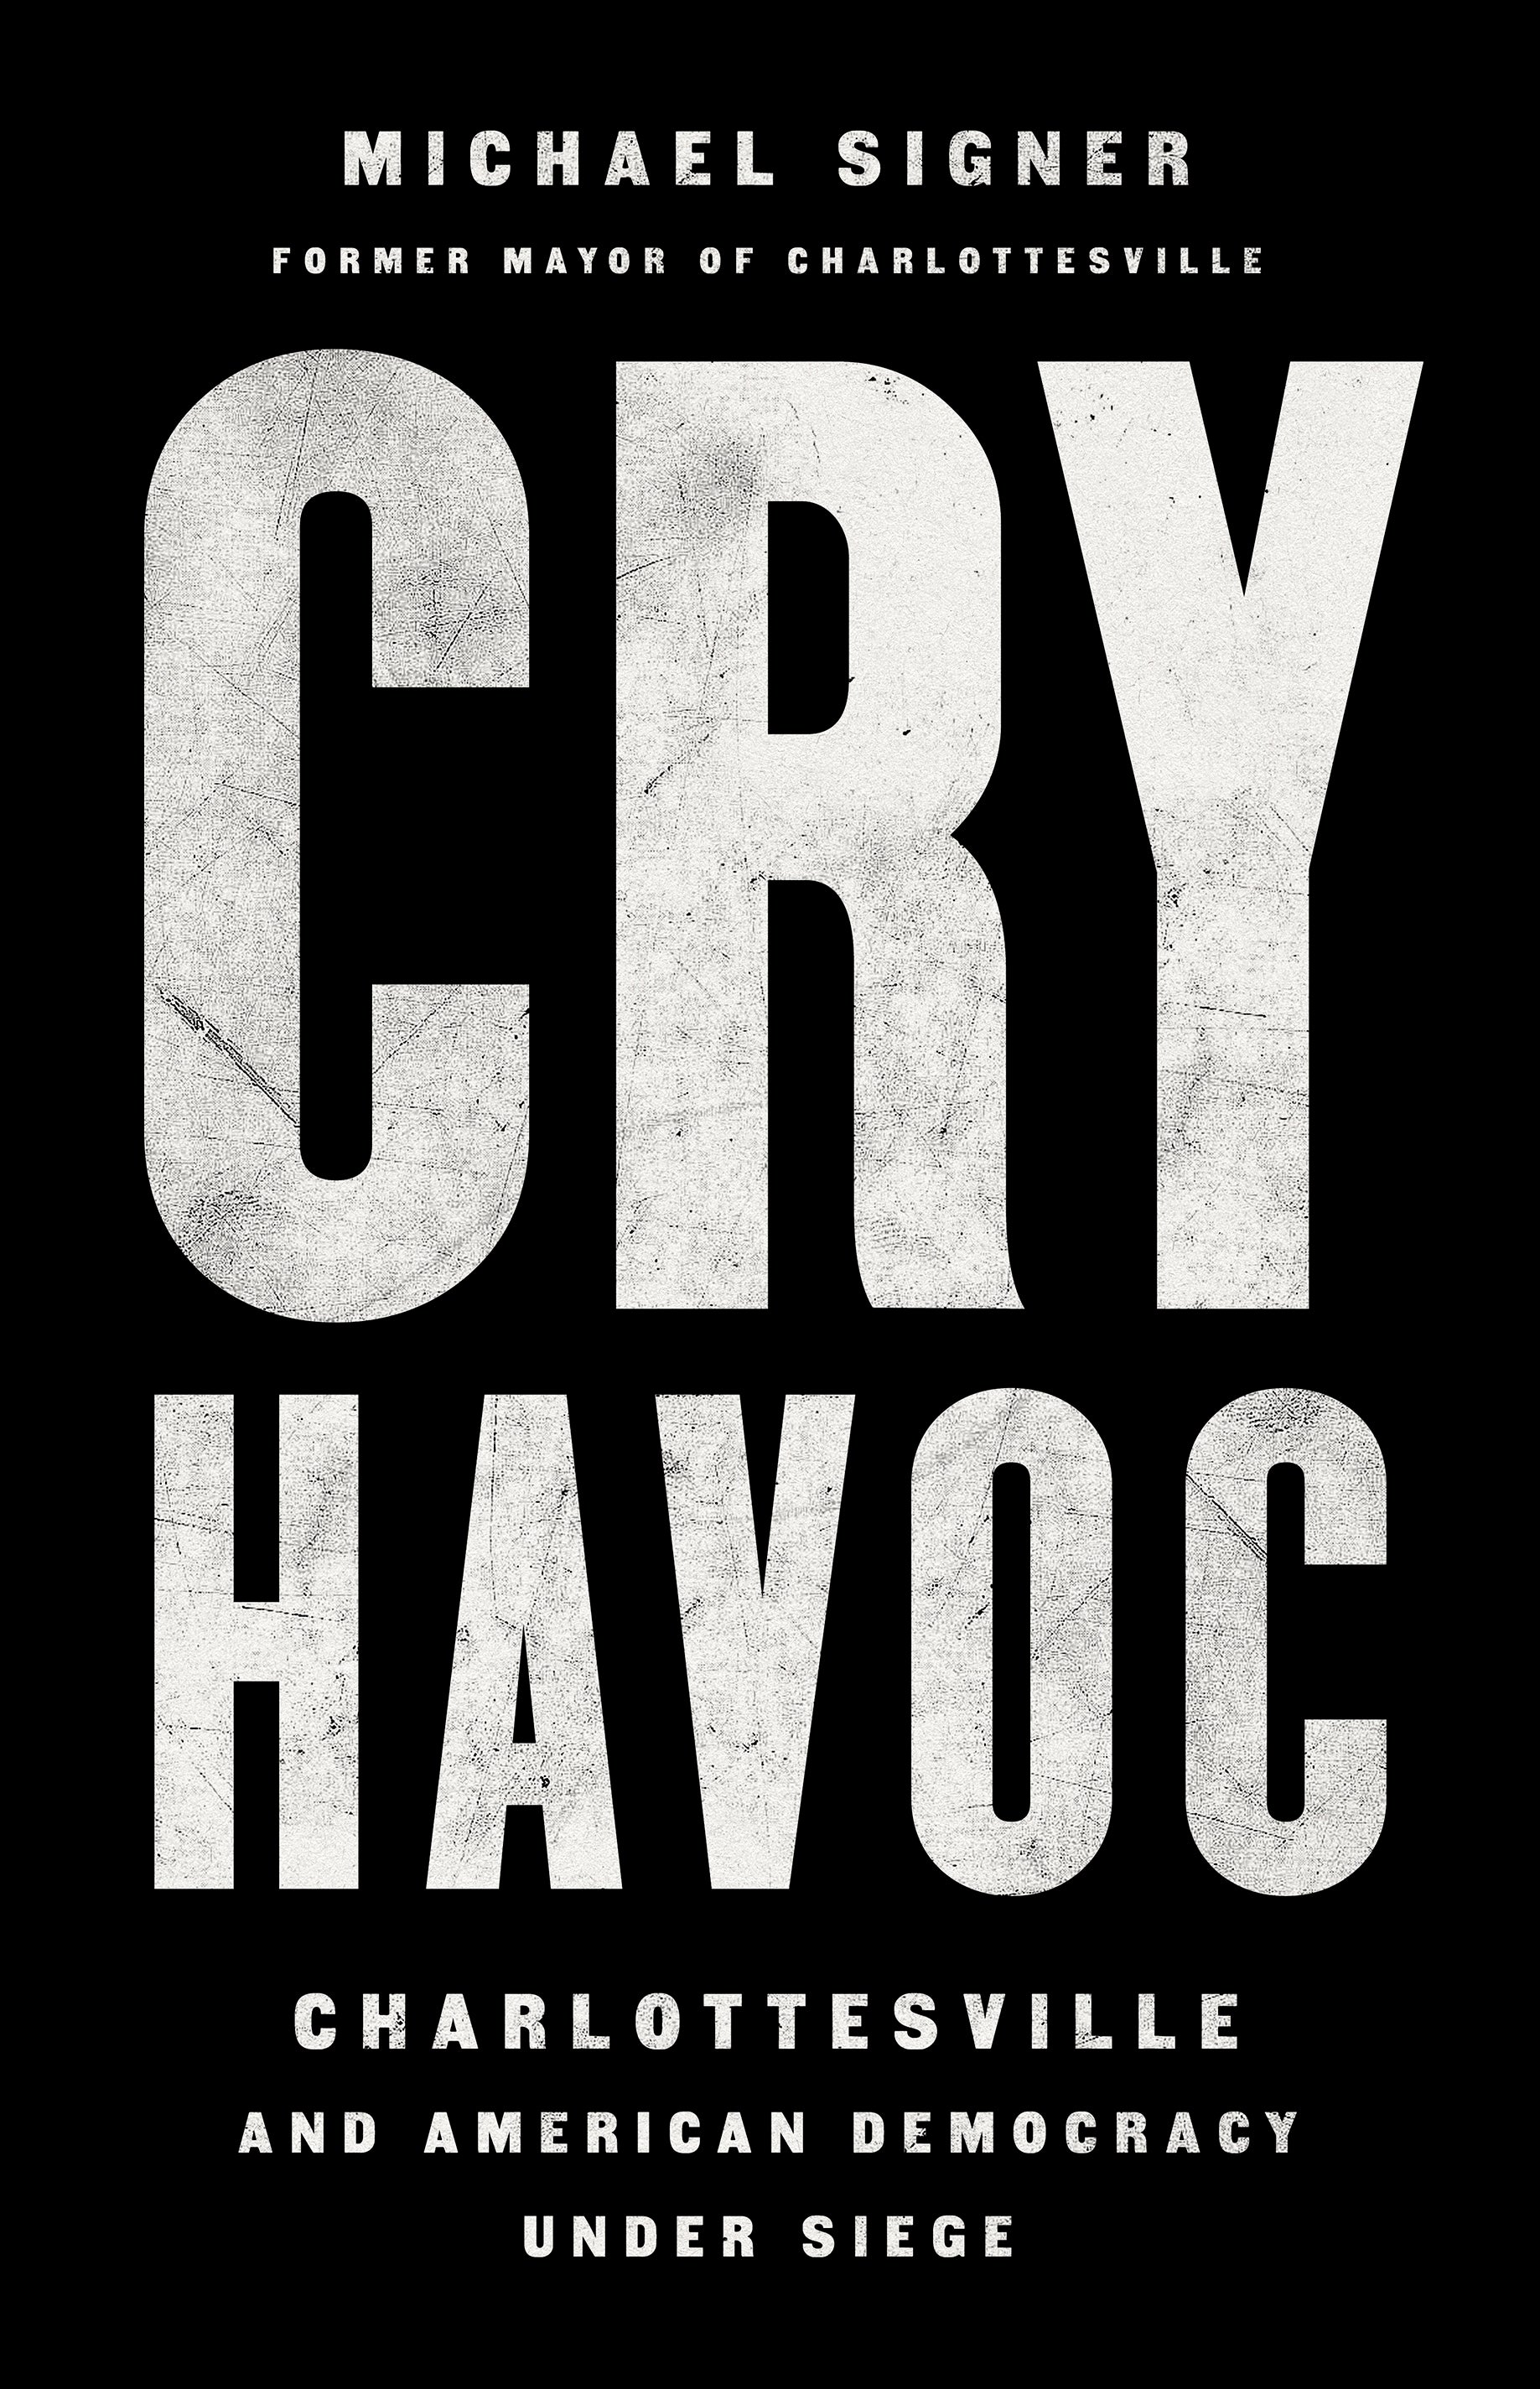 Book jacket cover for Cry Havoc: Charlottesville and American Democracy Under Siege.